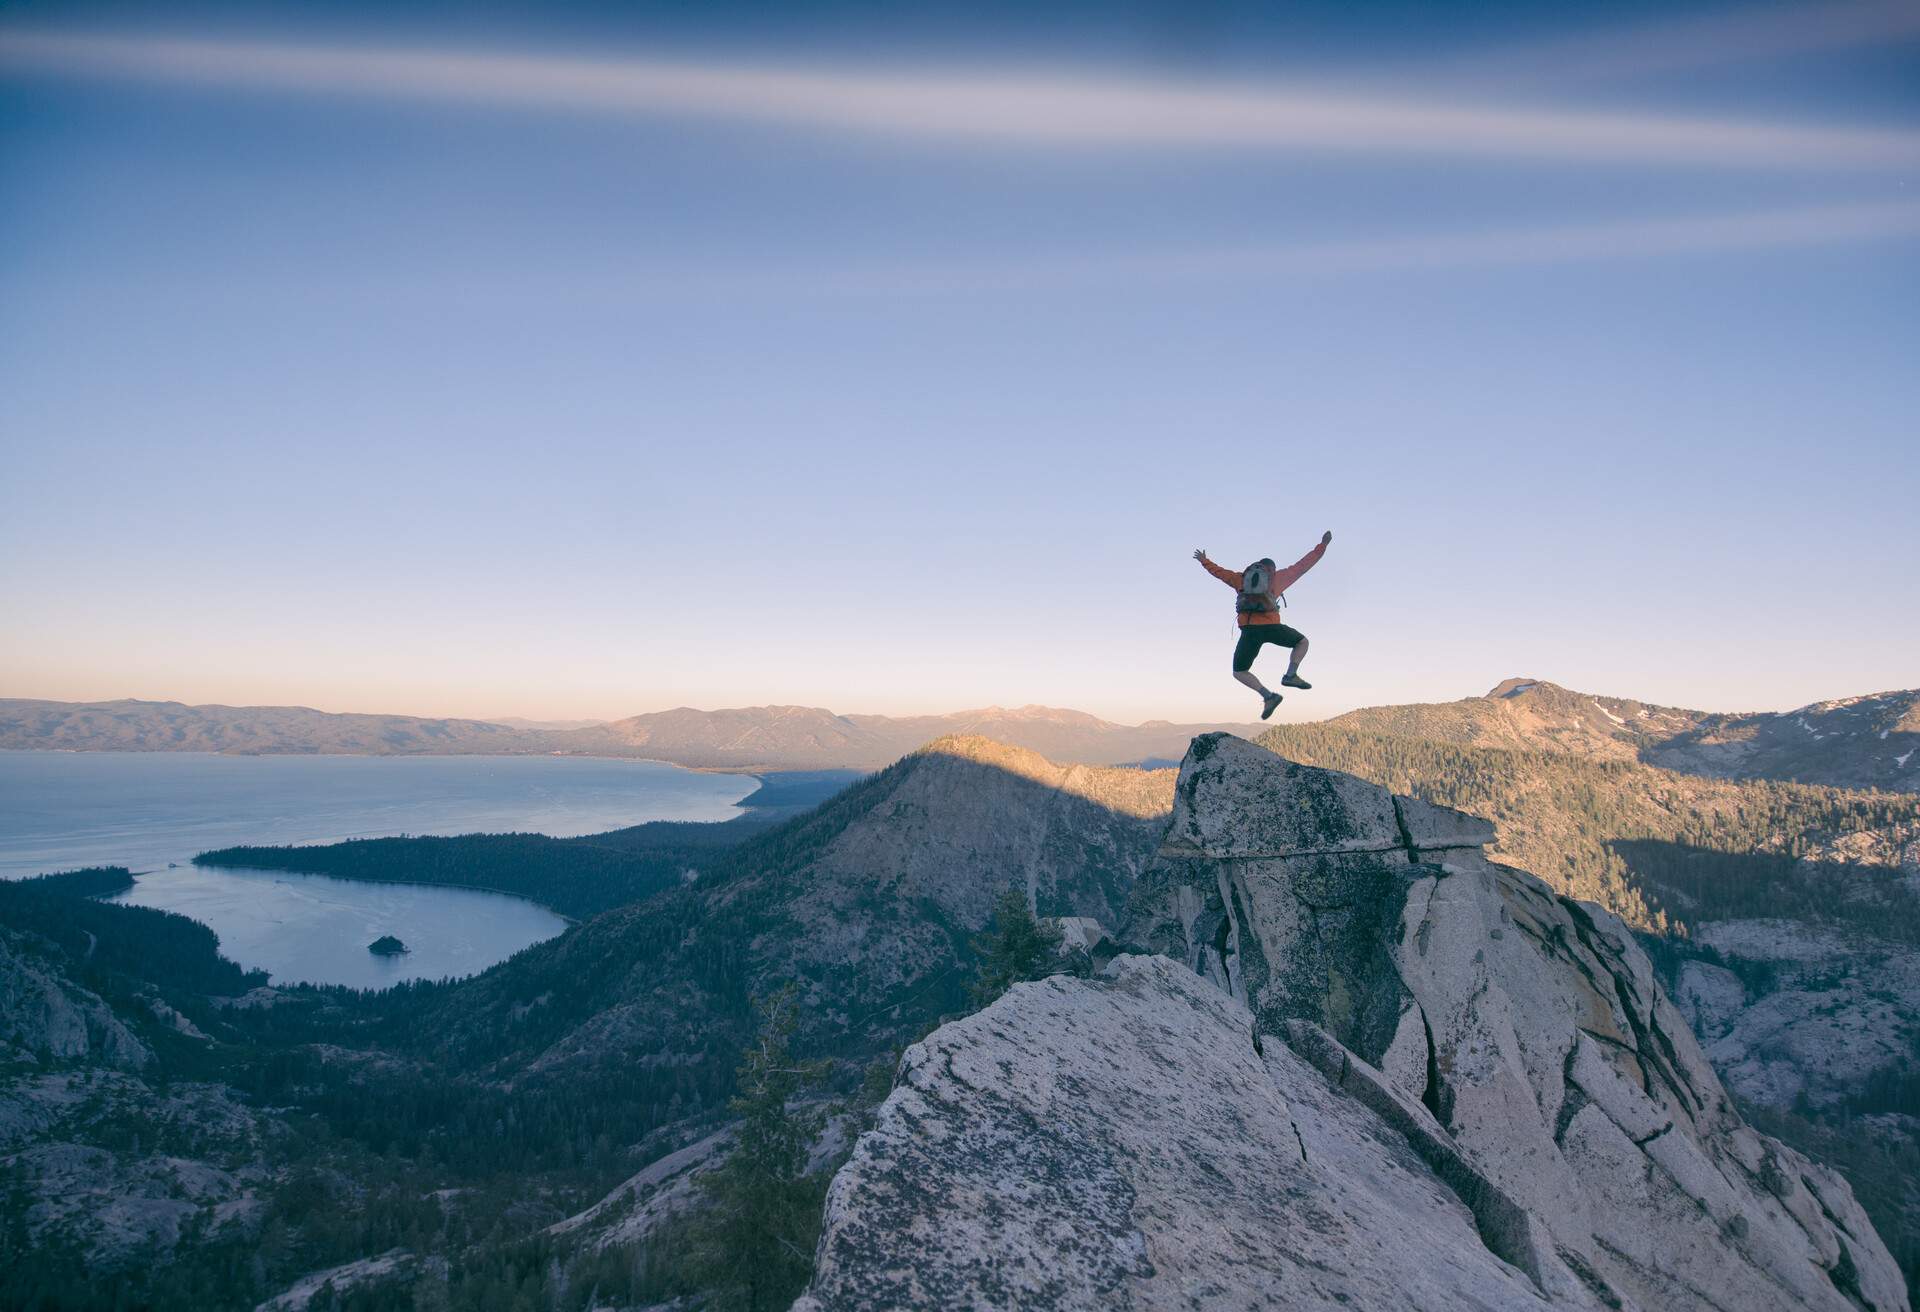 A man jumps on top of a rocky summit with overlooking views of a lake surrounded by a mountainous terrain.